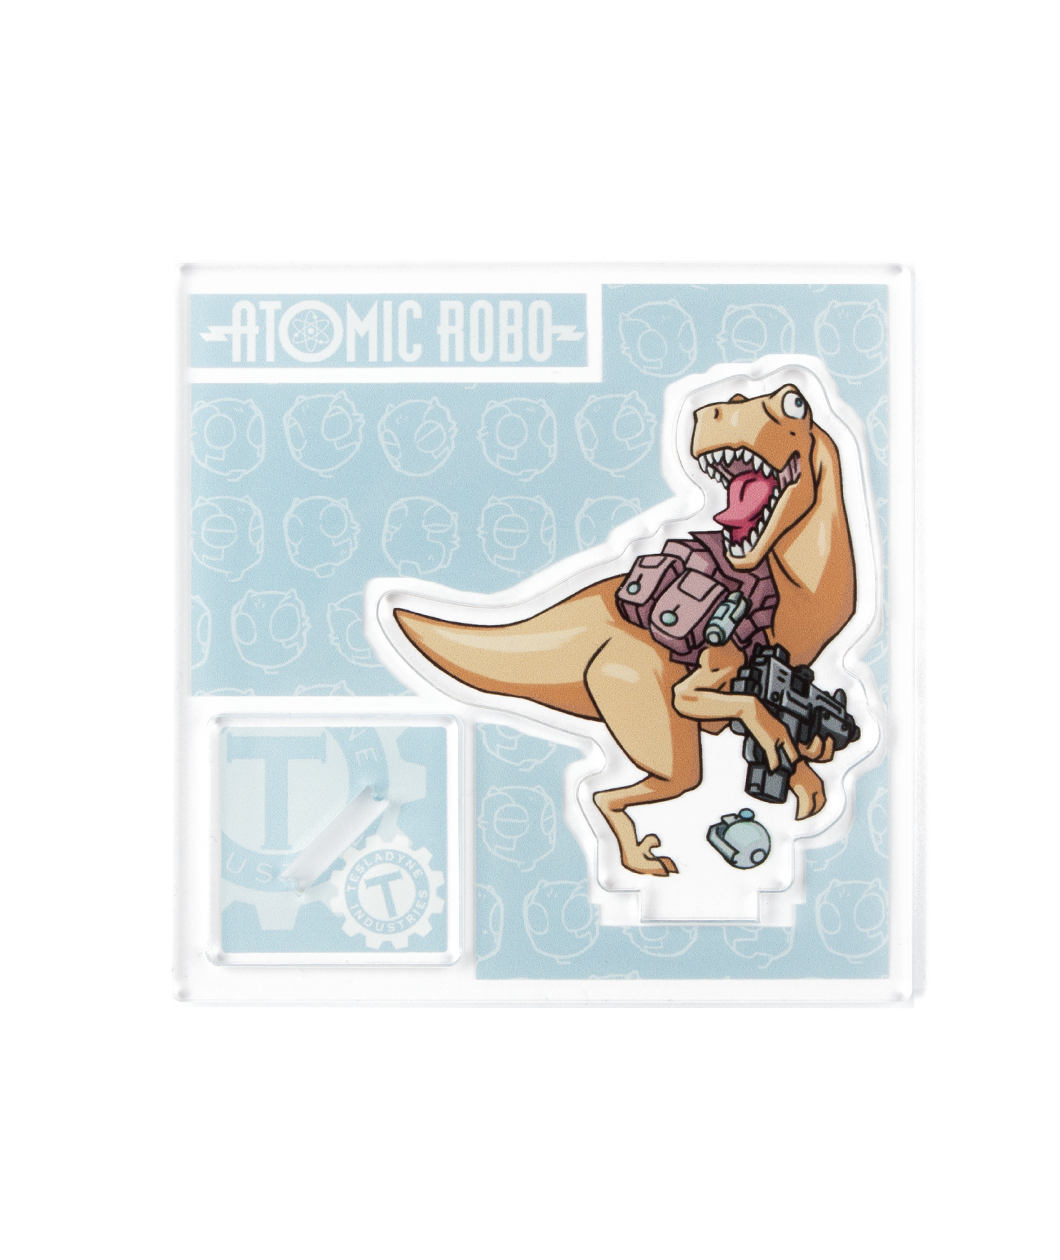 Dr. Dinosaur in standee form on a blue backing that says Atomic Robo. 